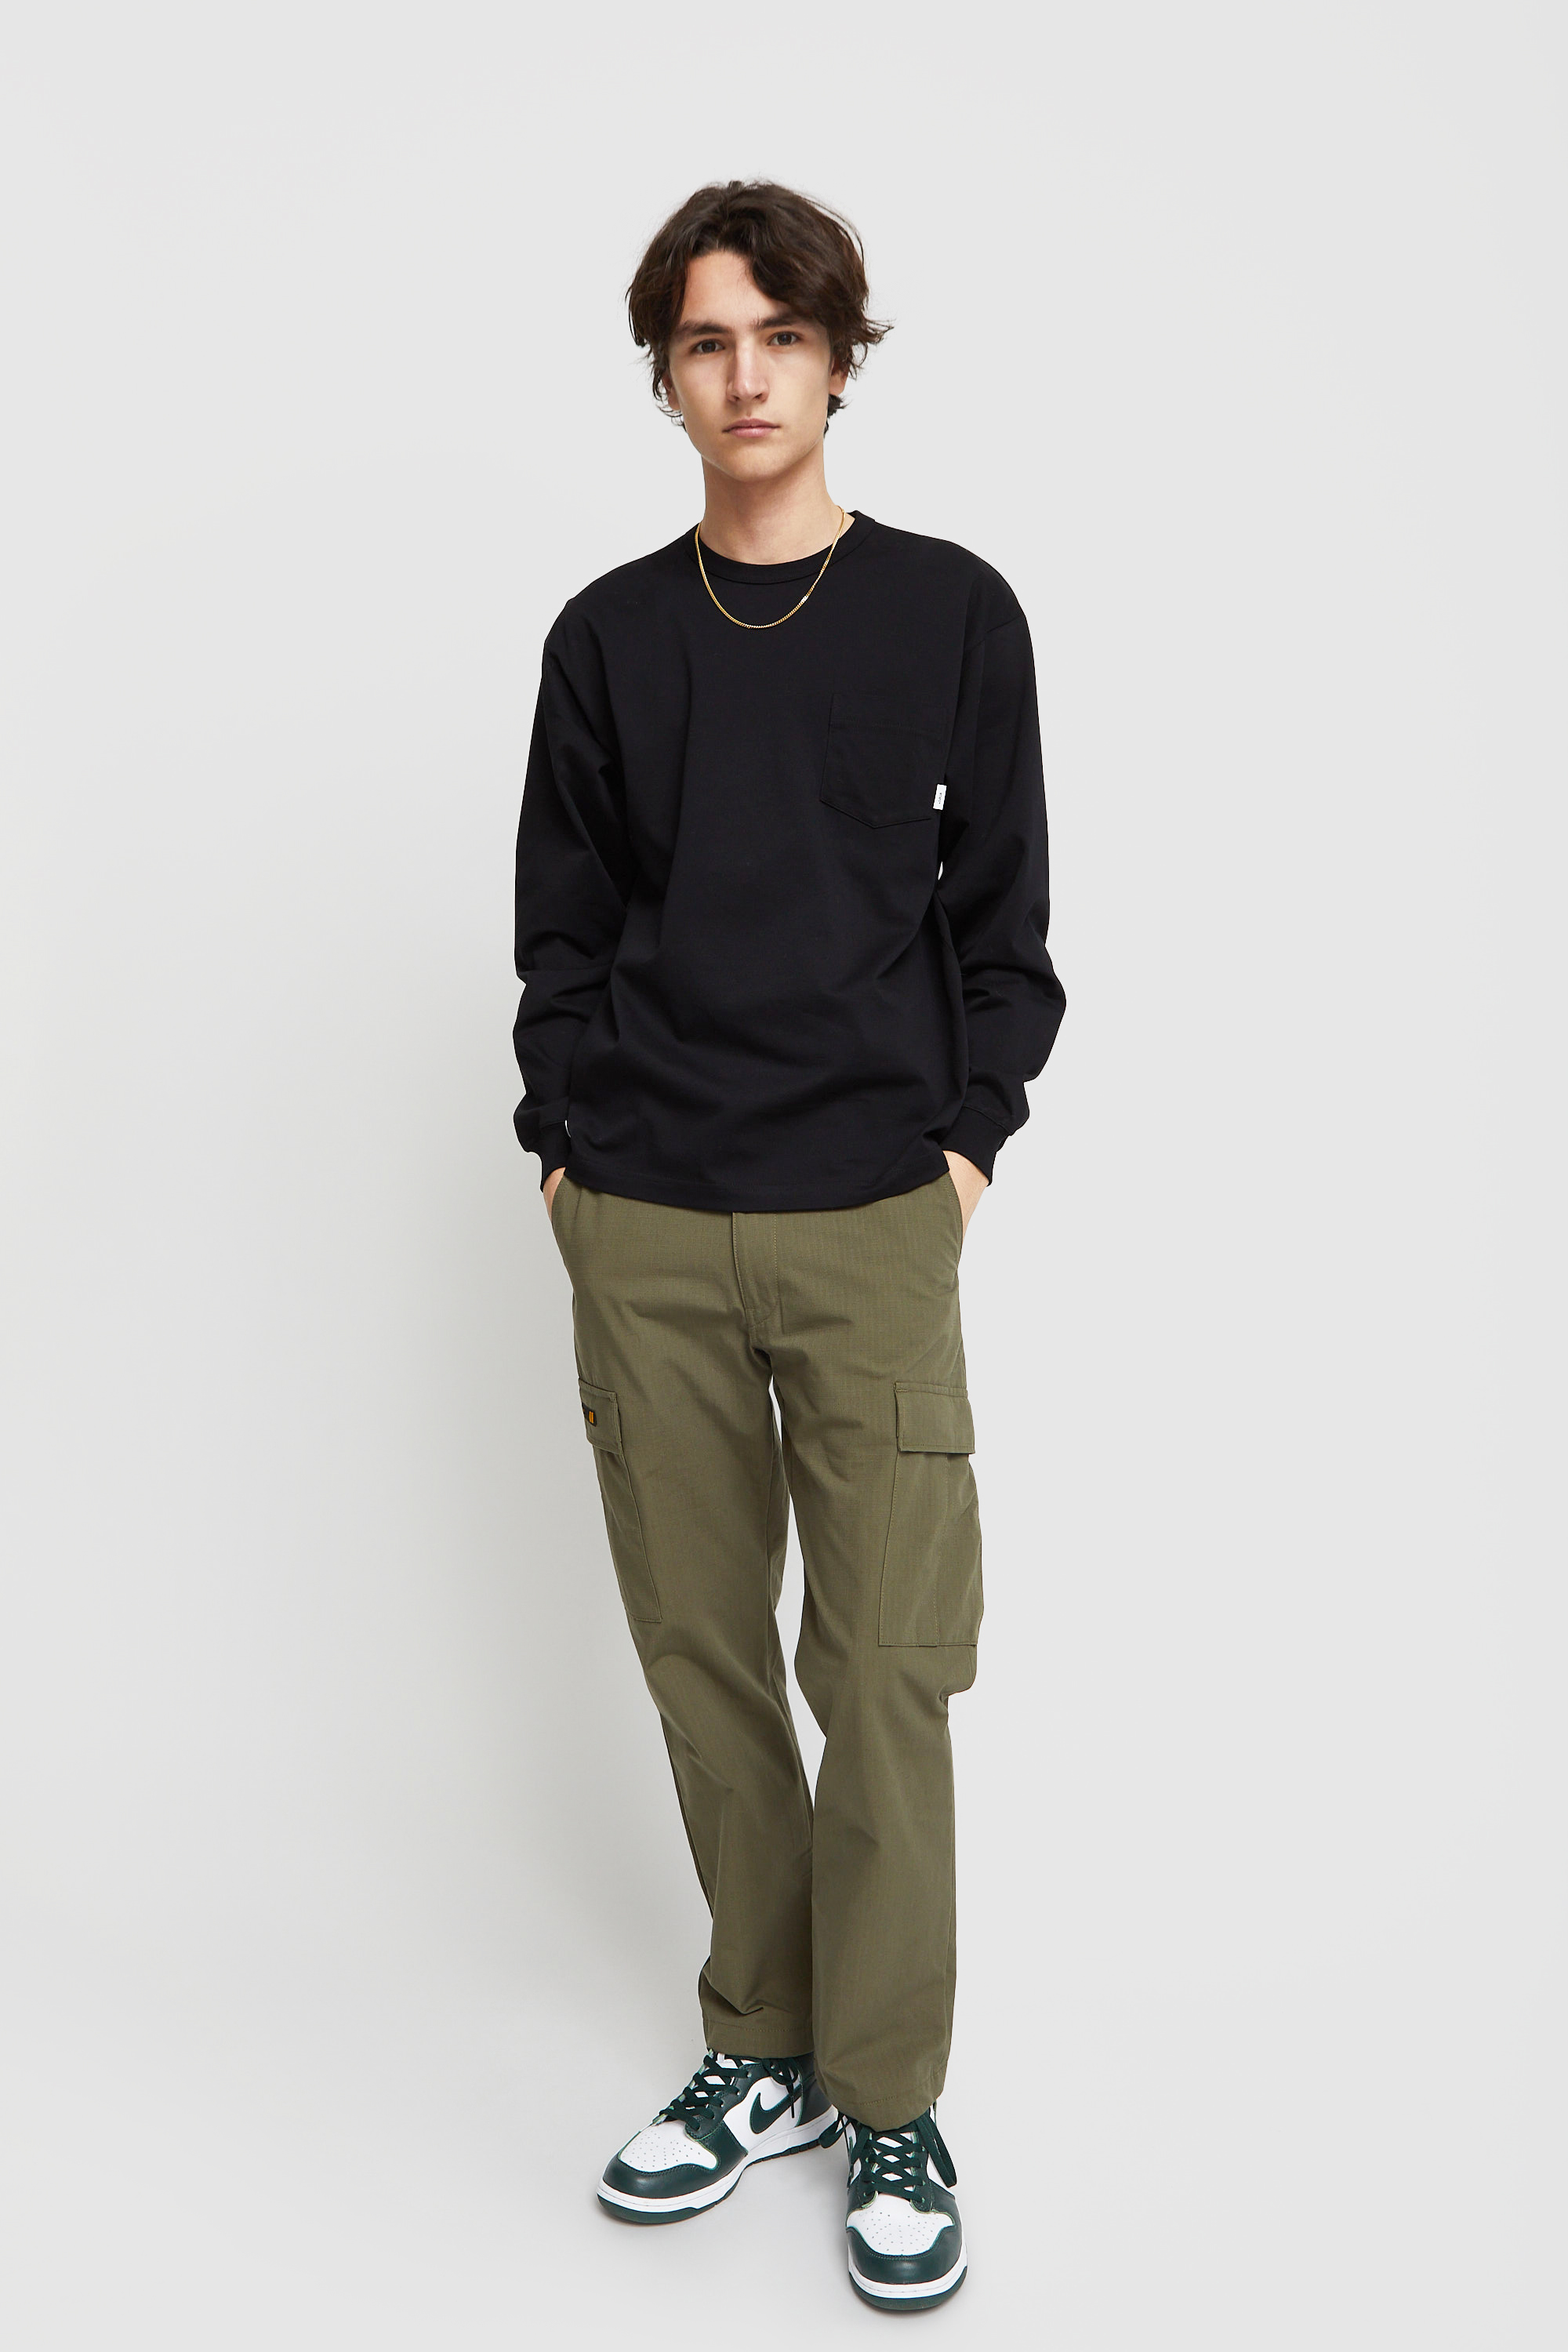 WTAPS JUNGLE STOCK TROUSERS NYCO RIPSTOP - ワークパンツ/カーゴパンツ